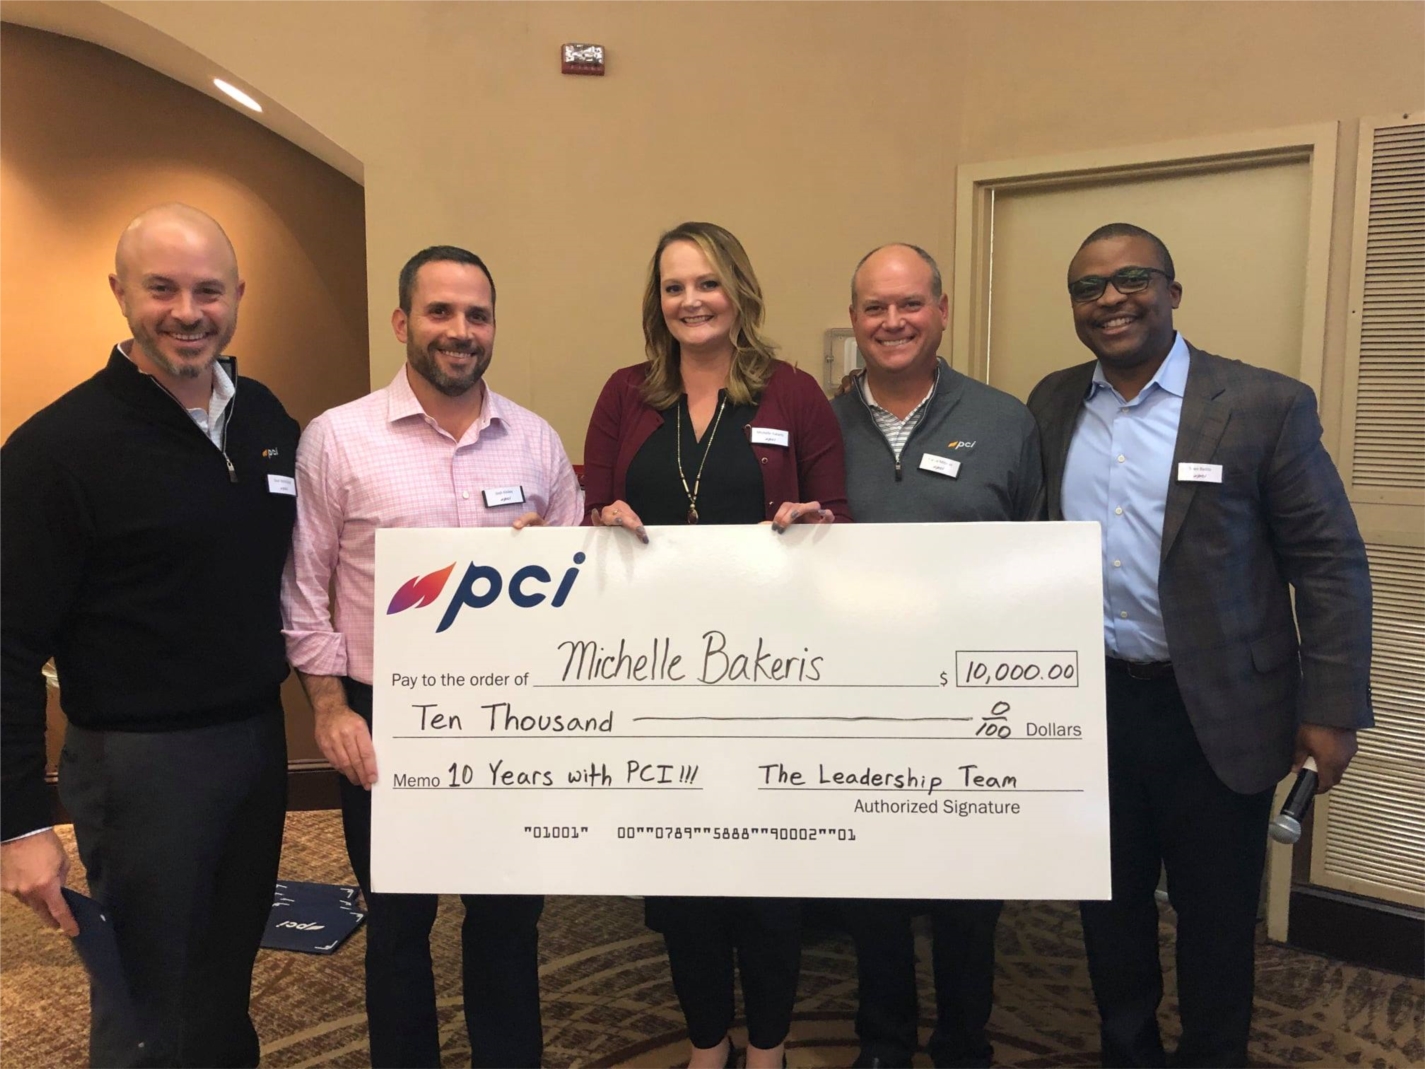 PCI's Leadership Team presents Michelle Bakeris with a $10,000 retention bonus for remaining with the company for 10 years.